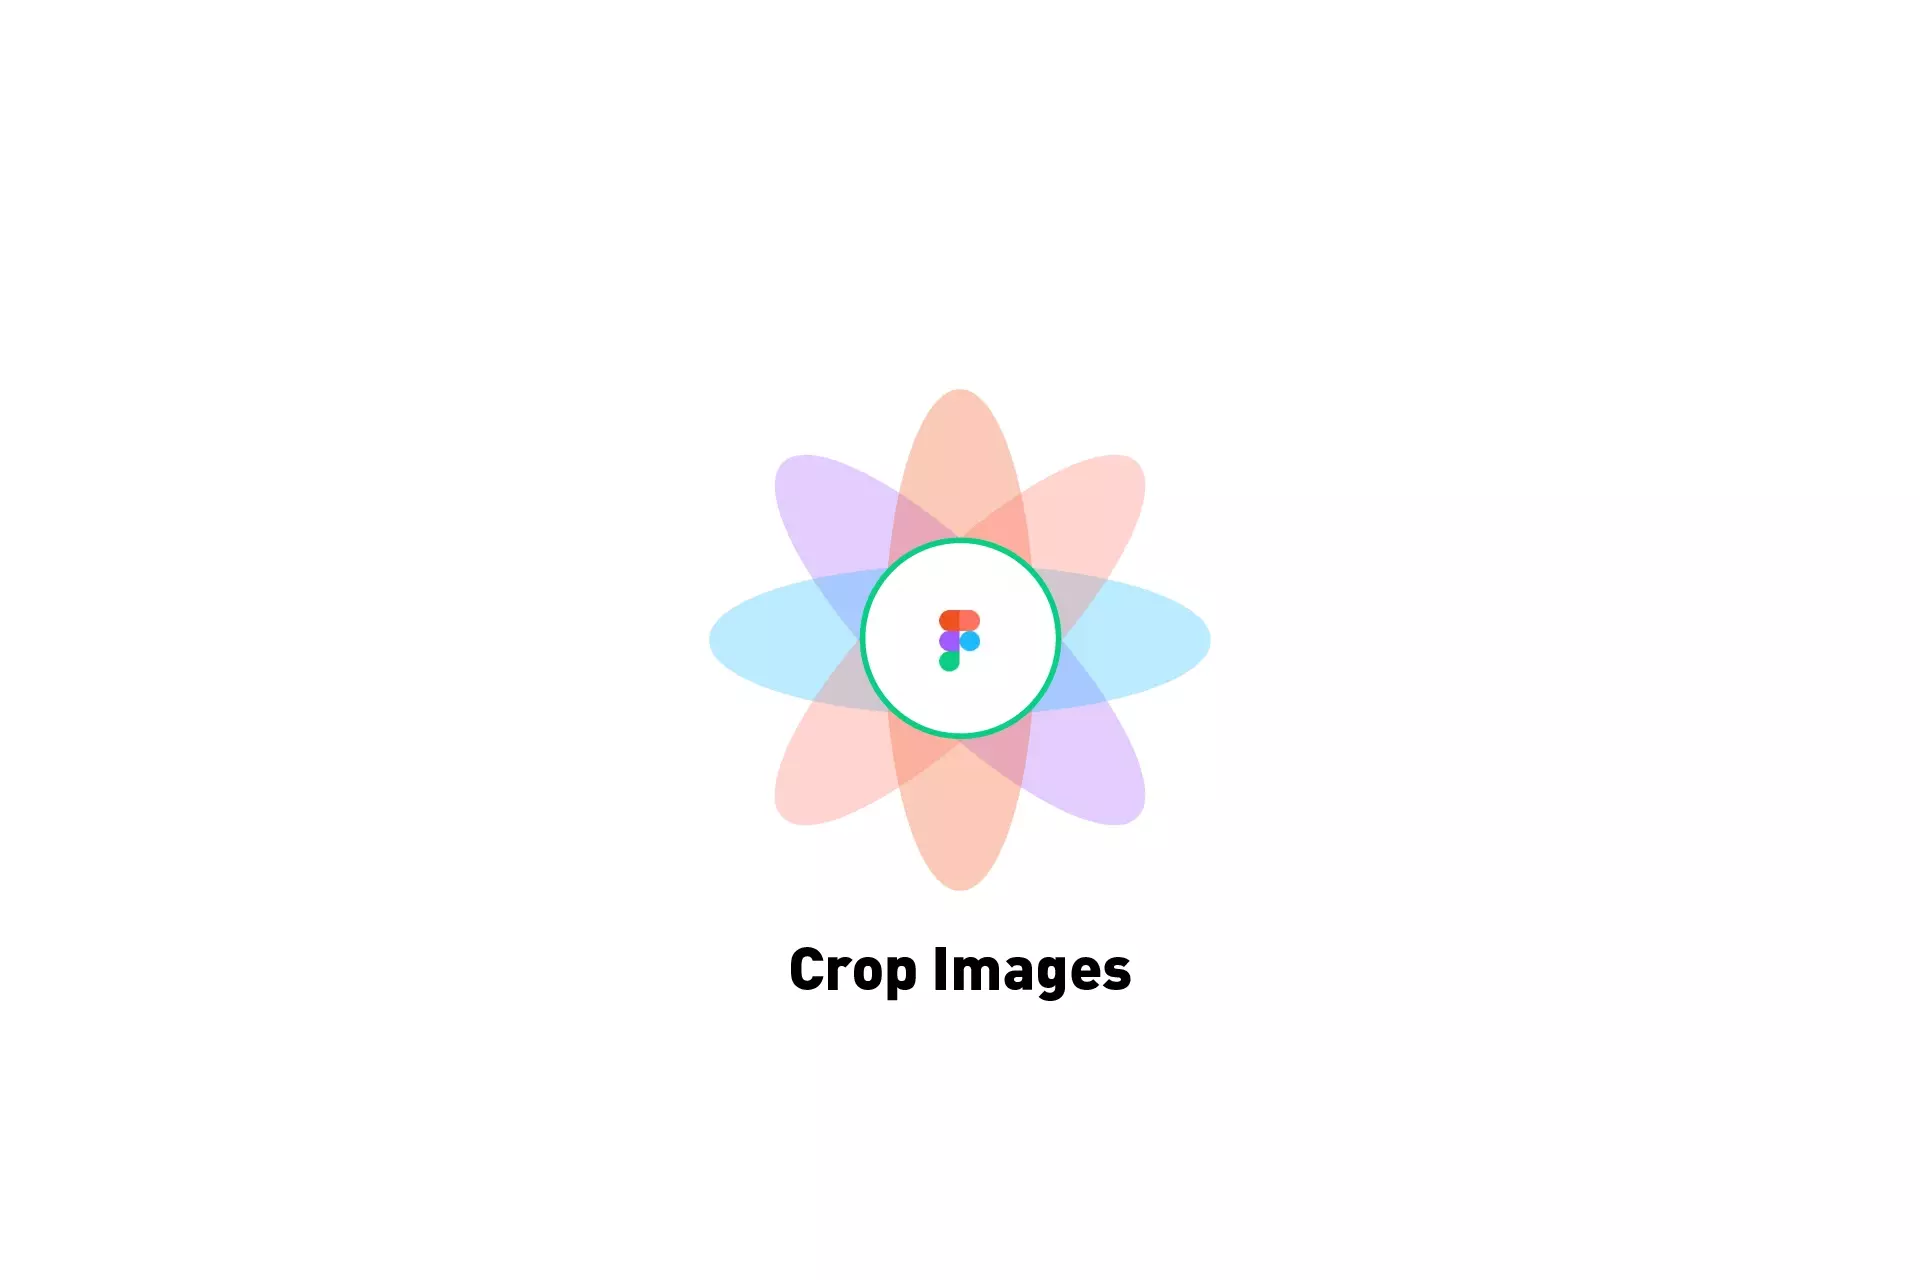 A flower that represents Figma with the text "Crop Images" beneath it.